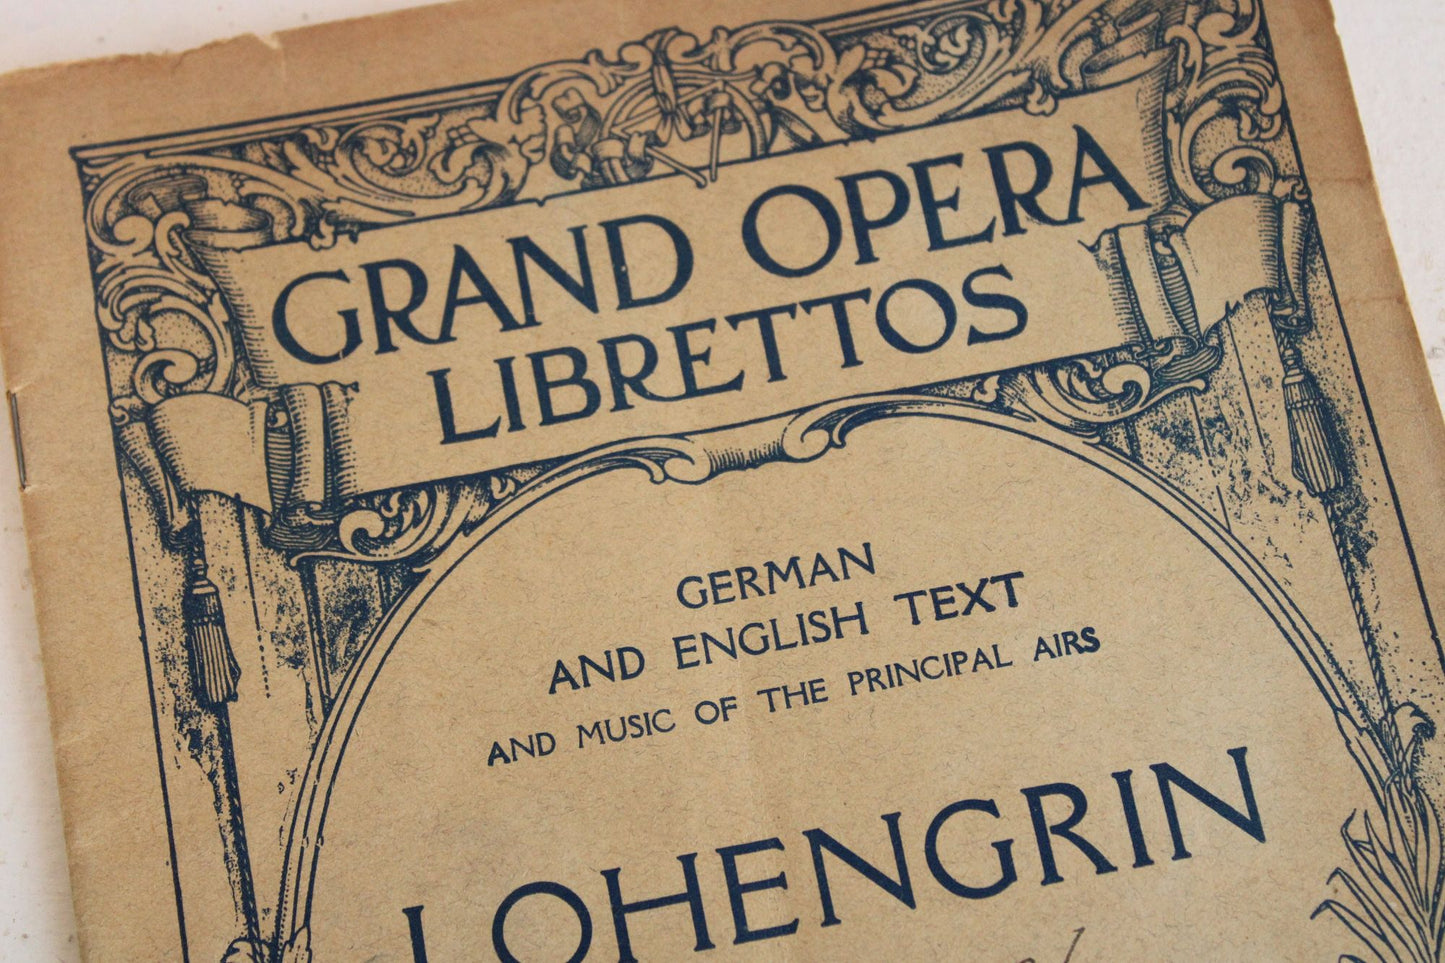 Vintage 1800s Music Booklet, Grand Opera Librettos, Lohengrin by Wagner, Oliver Ditson Company